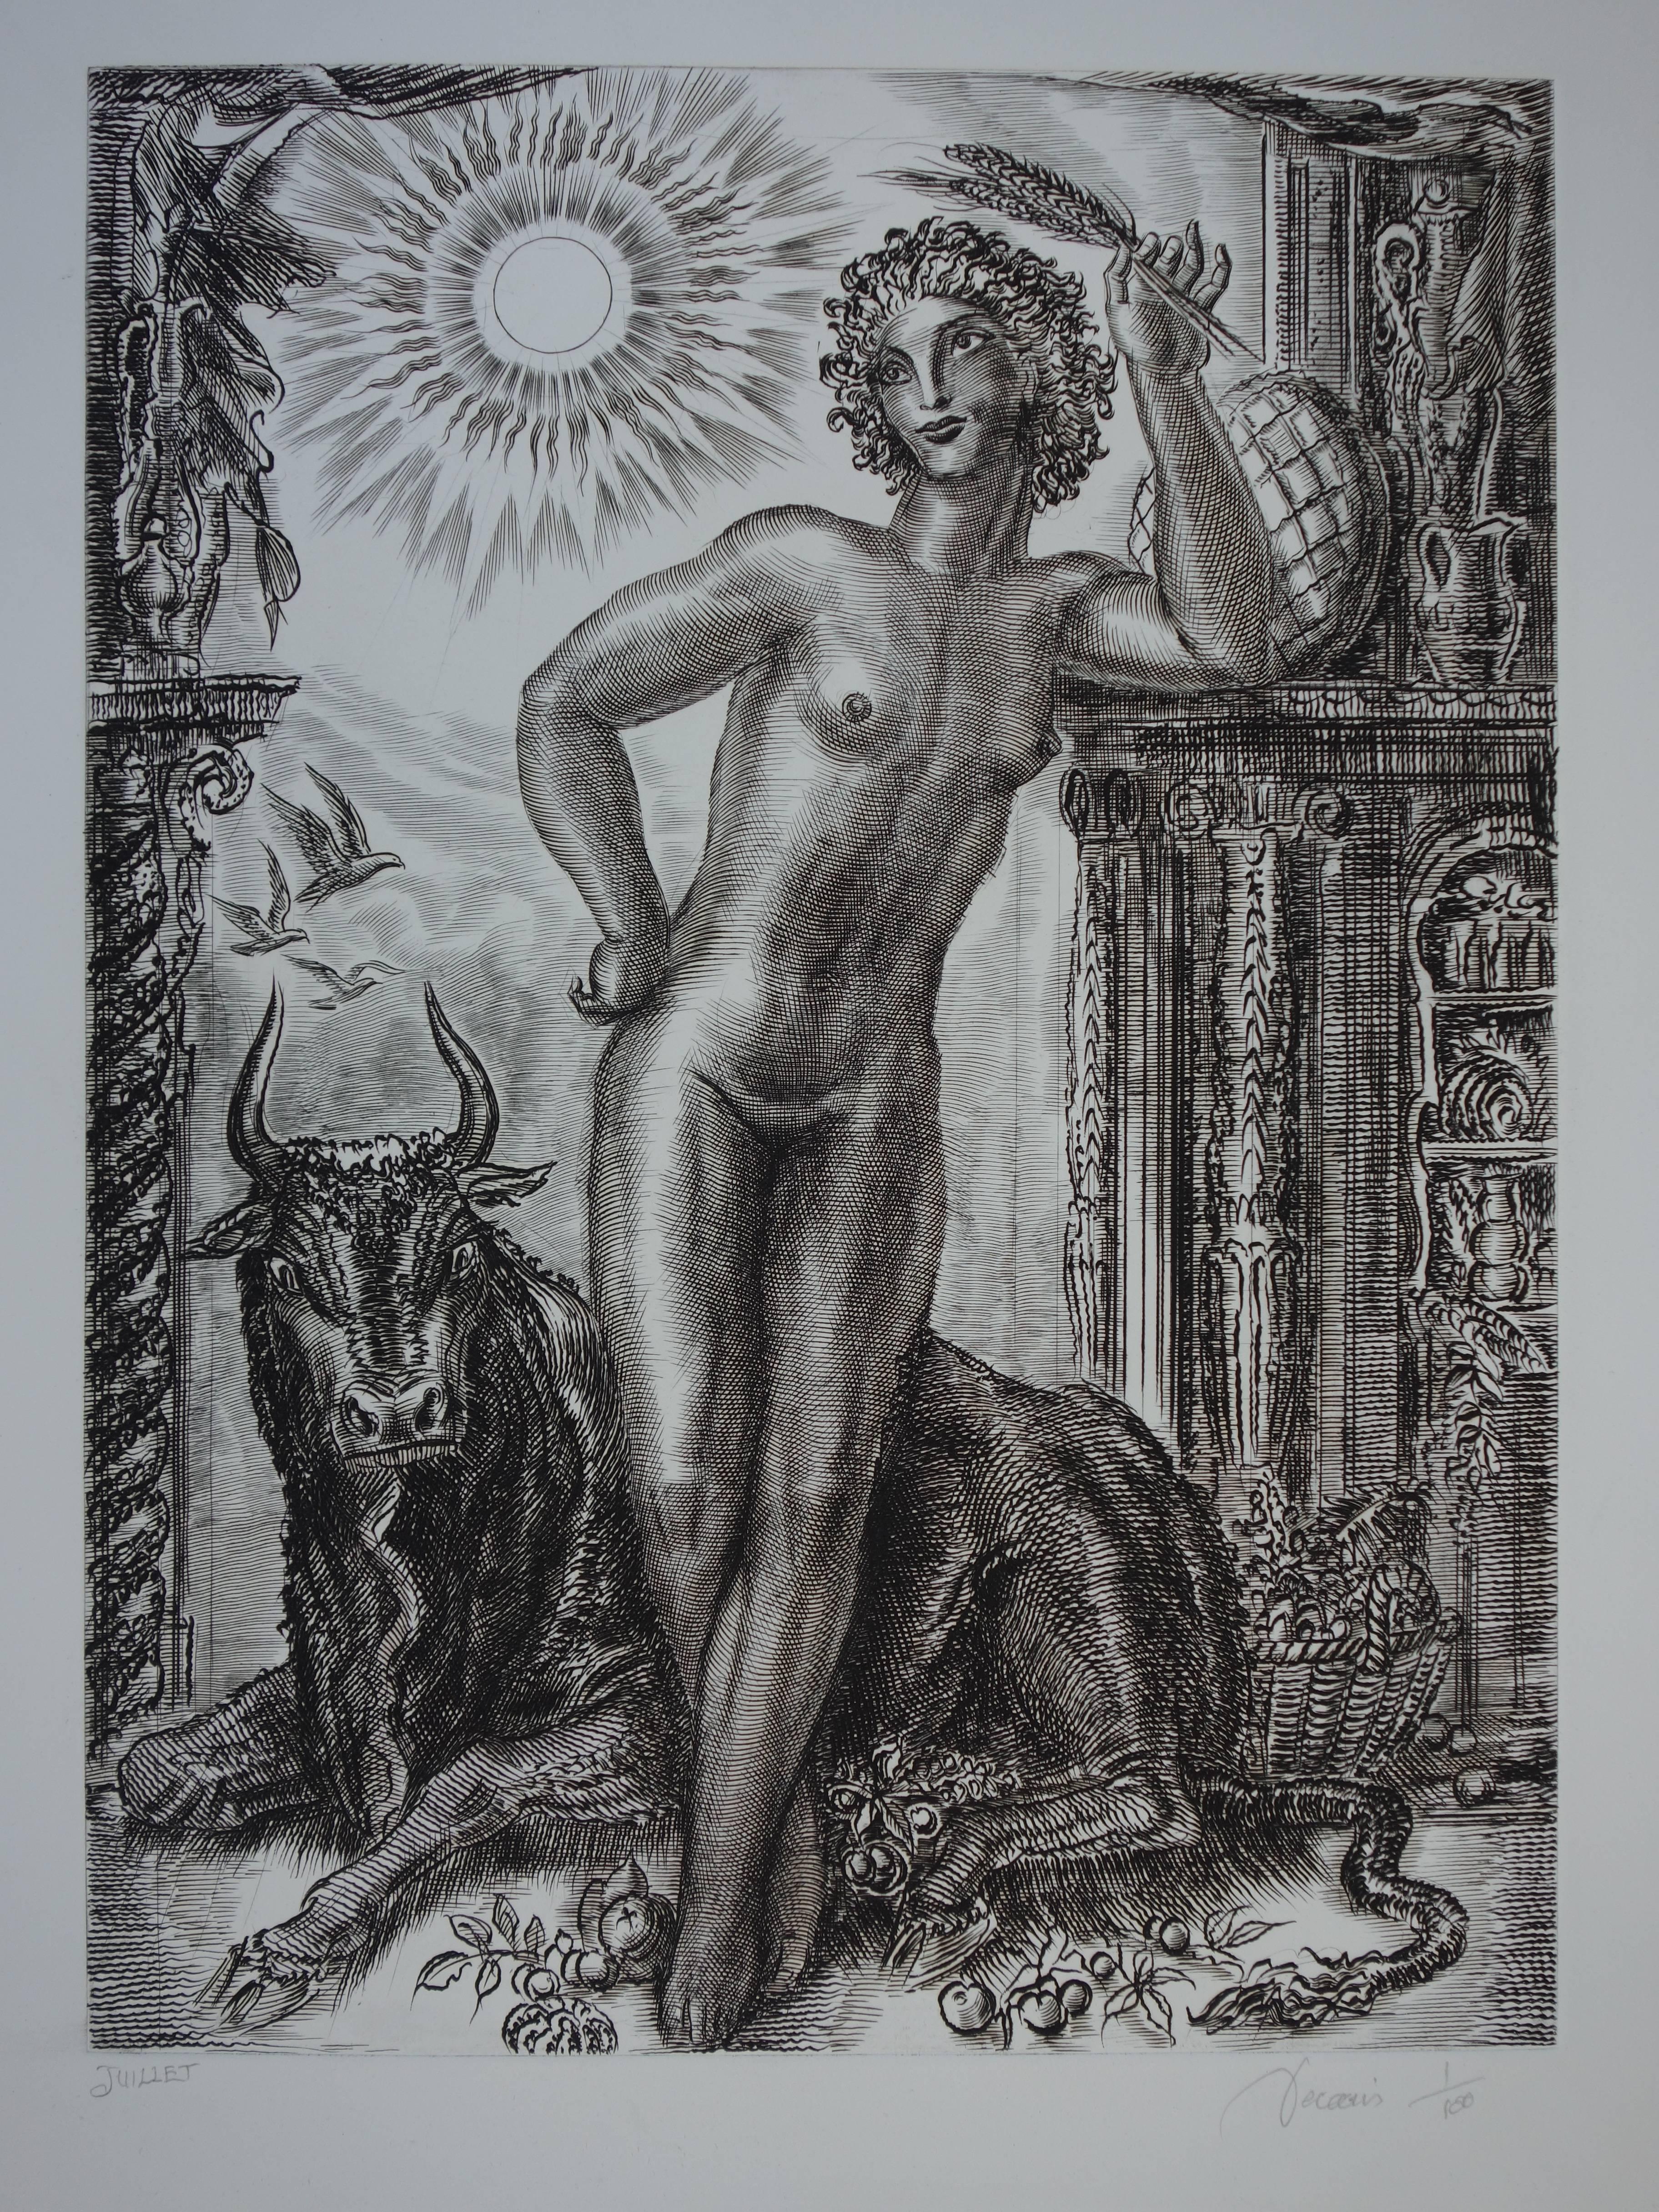 July : Rise of Nature - Original handsigned etching - Exceptional n° 1/100